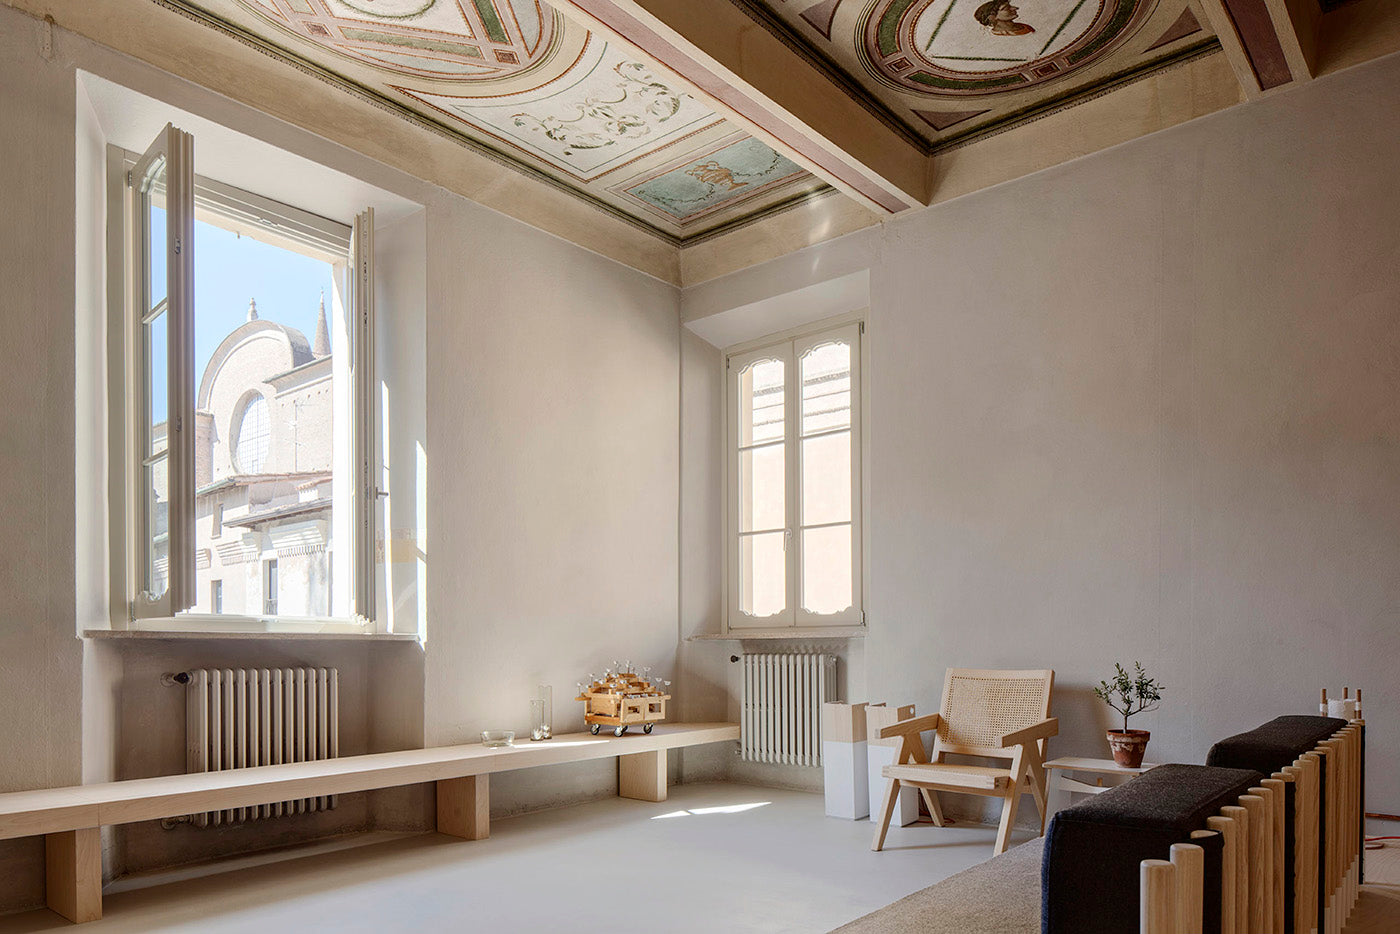 Archiplan in Mantua, Italy, photographed by Davide Galli for The Home Upgrade